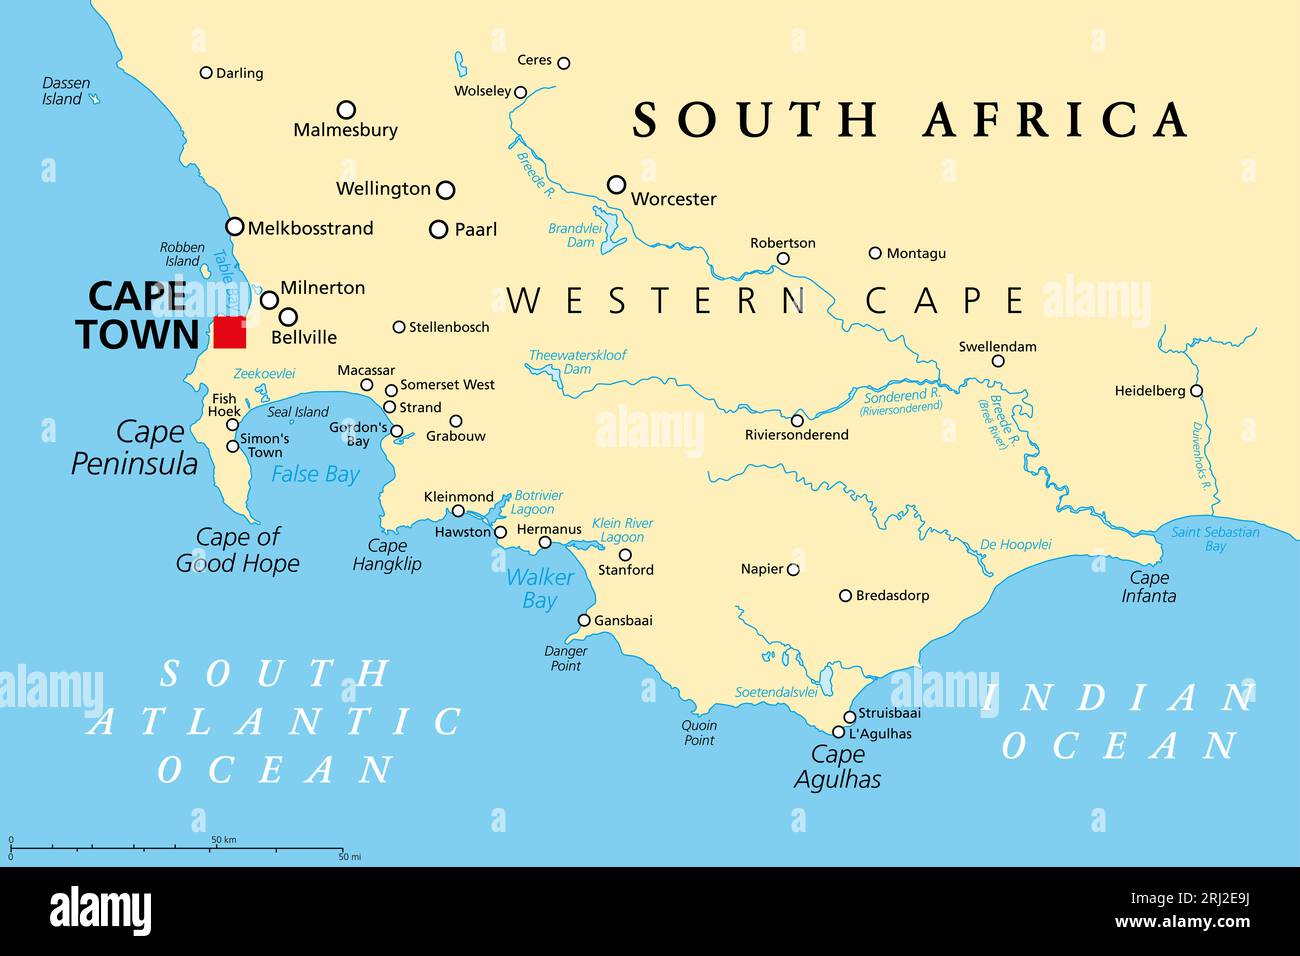 Cape of Good Hope, a region in South Africa, political map. From Cape Town and Cape Peninsula, a headland on the South Atlantic coast, to Cape Agulhas. Stock Photo